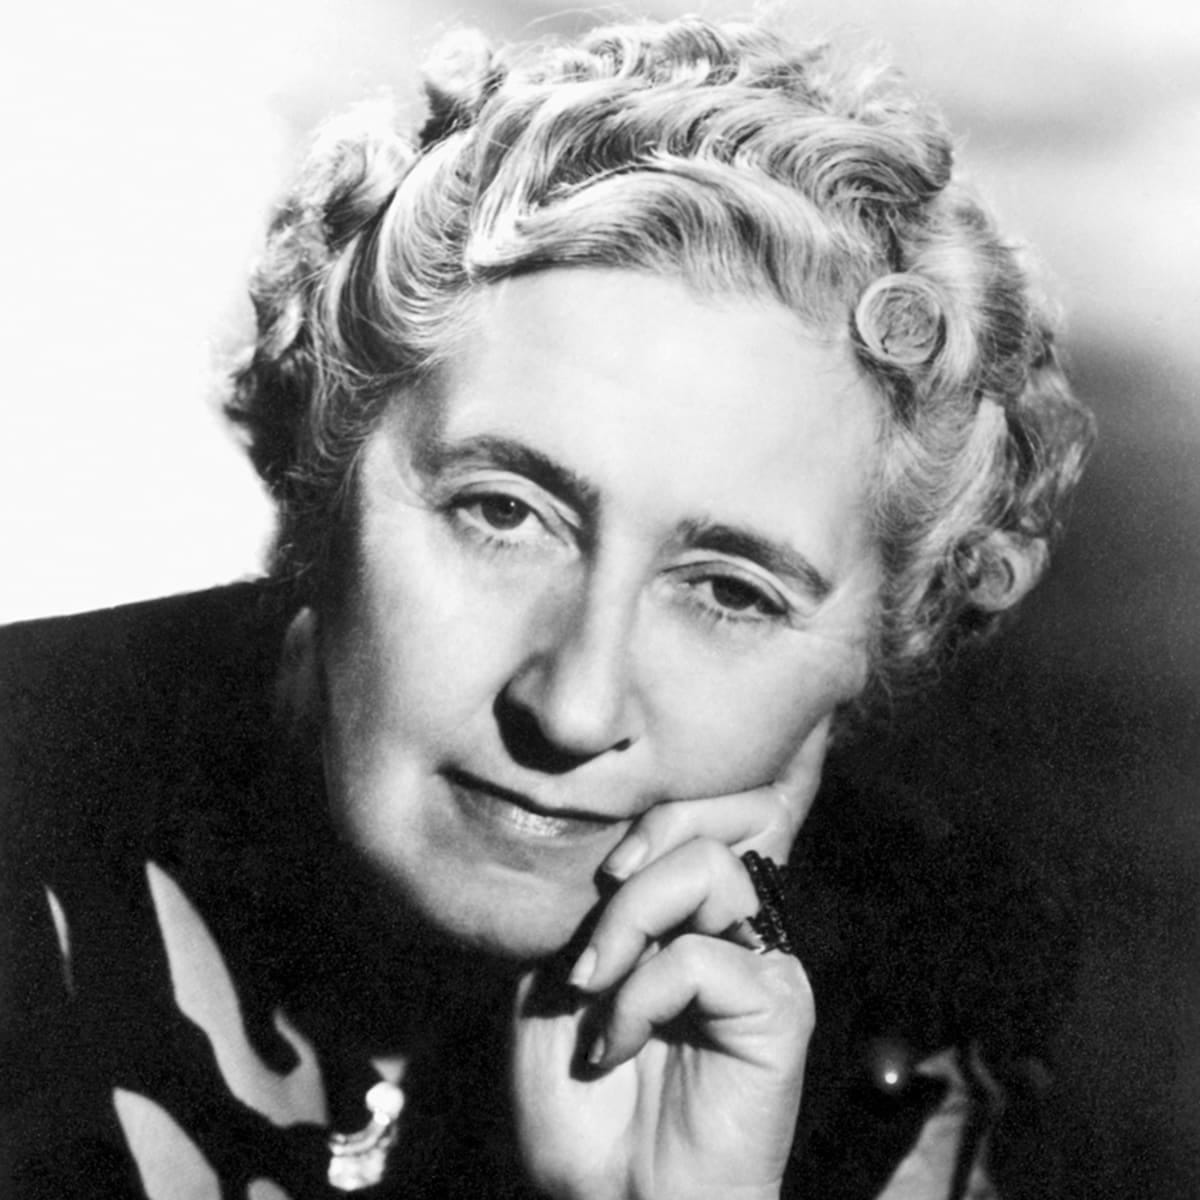 Agatha Christie - Books, Disappearance &amp; Life - Biography